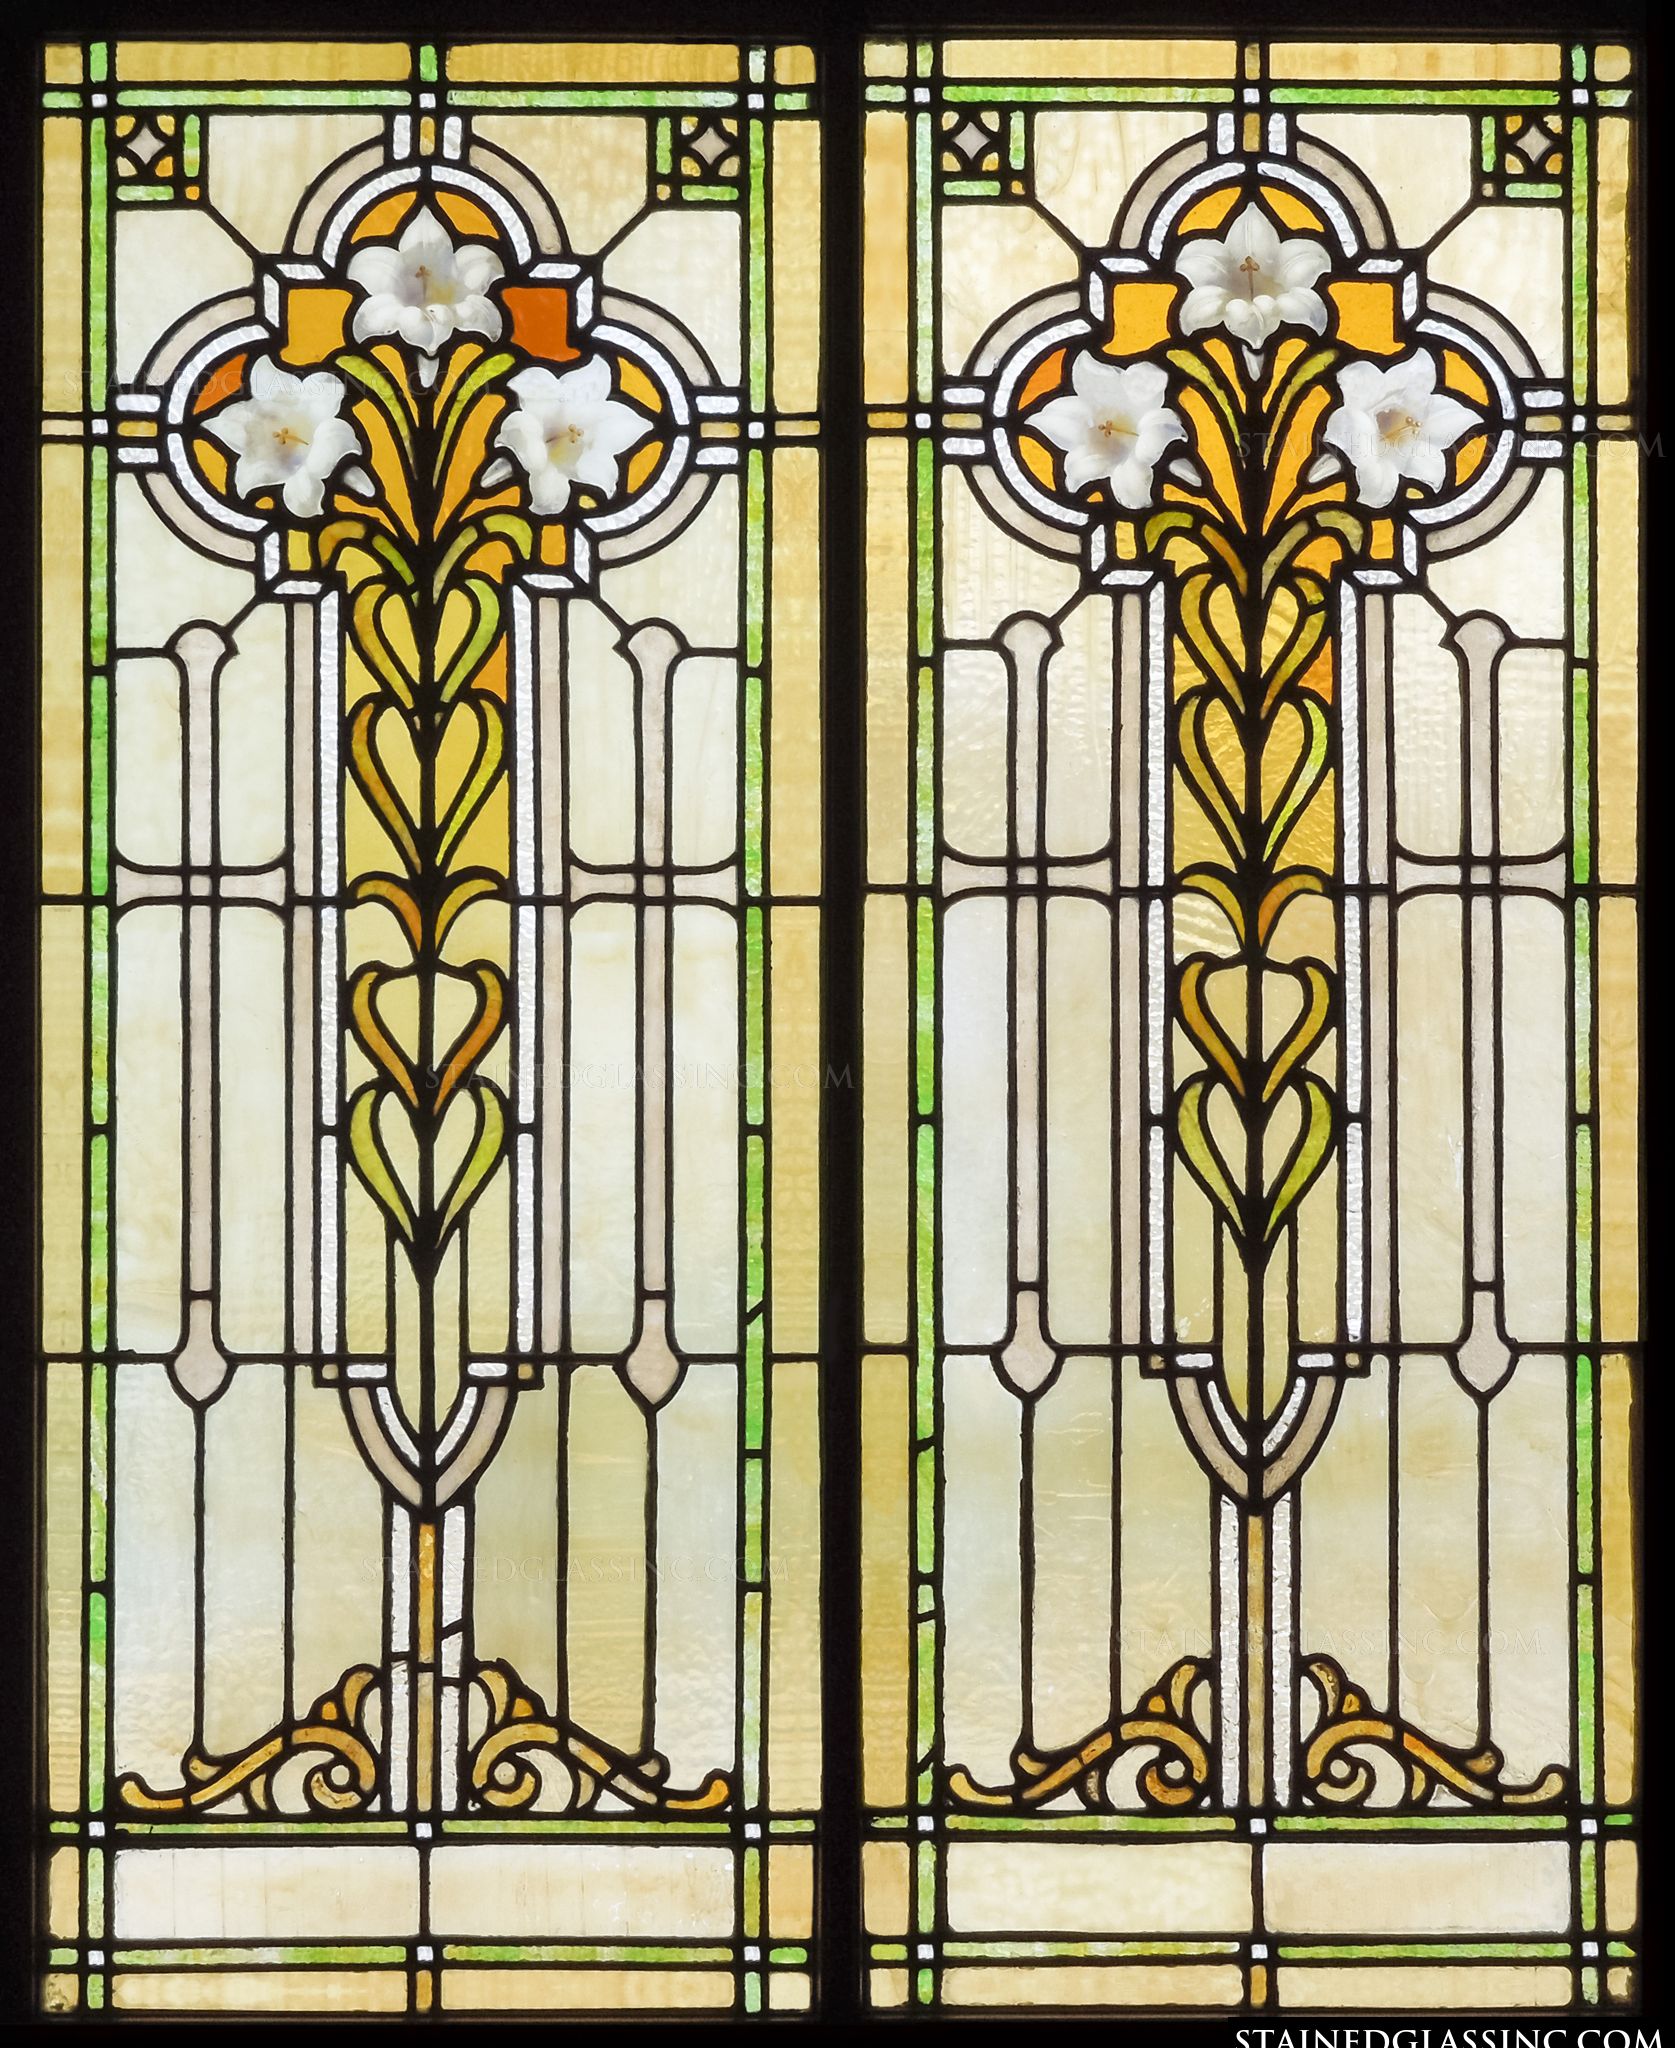 Wicked stained glass design